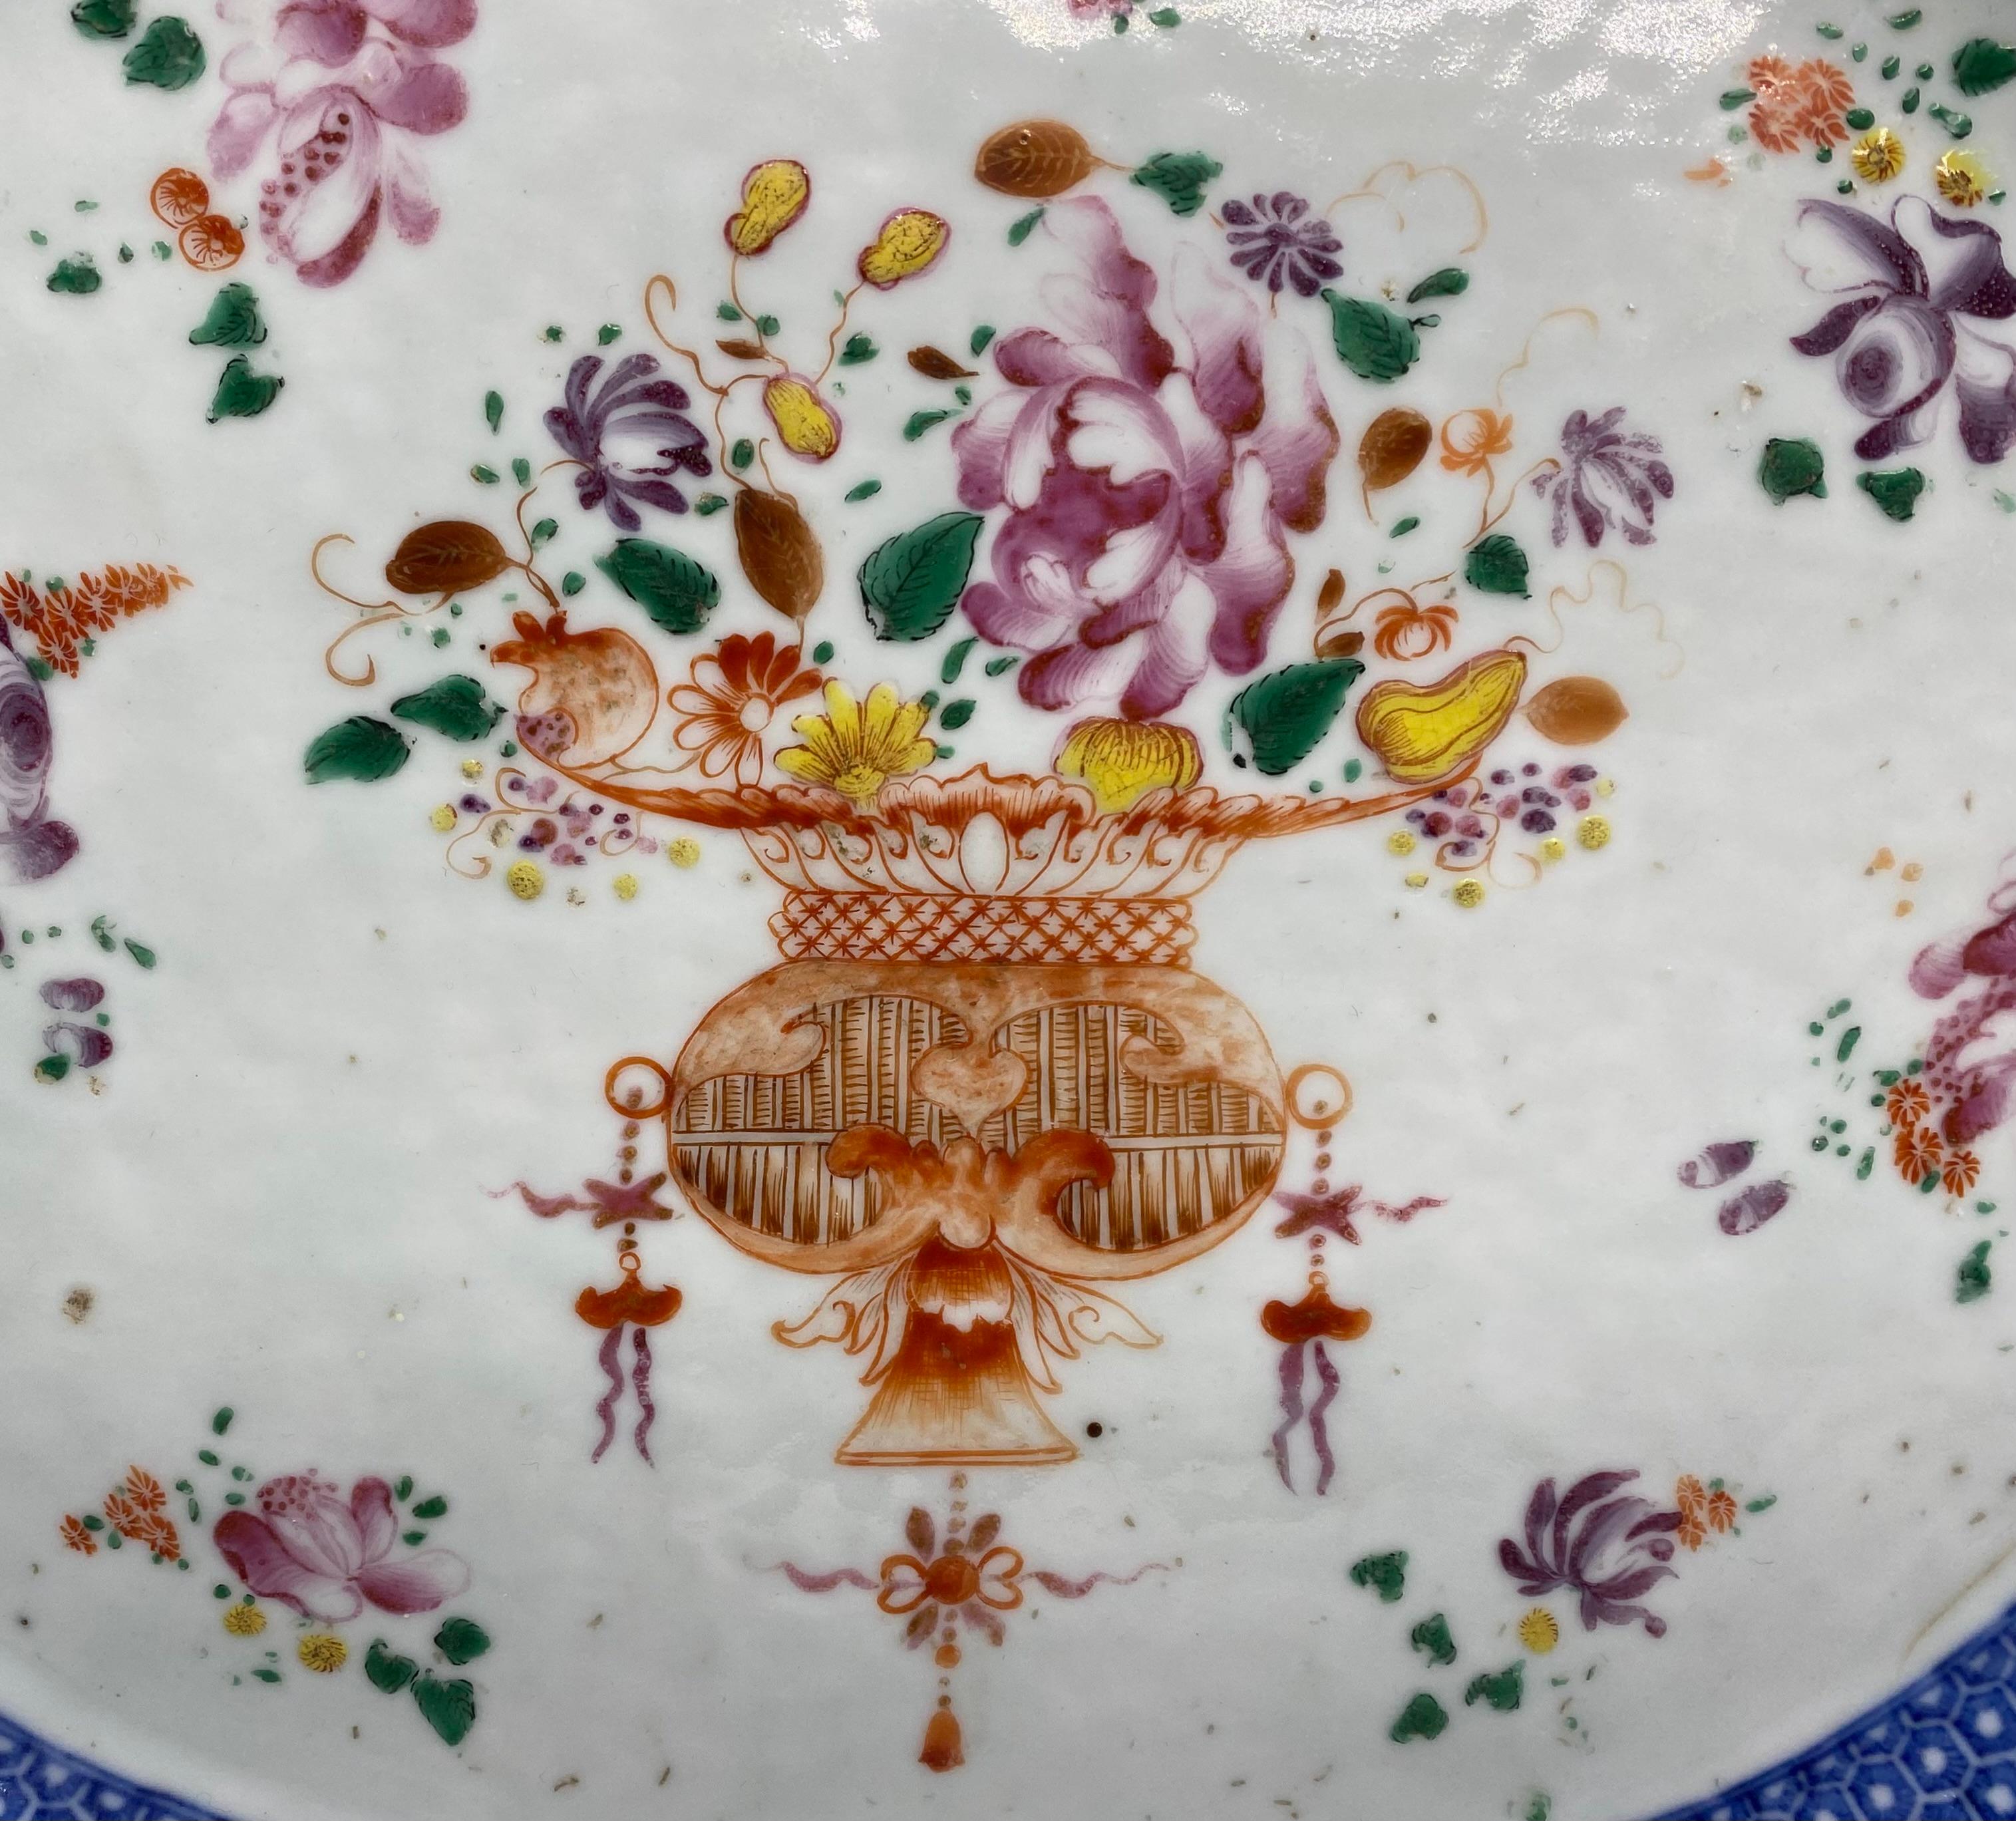 Chinese porcelain serving plate, c. 1760, Qianlong Period. The centre painted in famille rose enamels, with a large elaborate basket of flowers and fruit, surrounded by sprigs of flowers, within an underglaze blue cell diaper motif.
The border